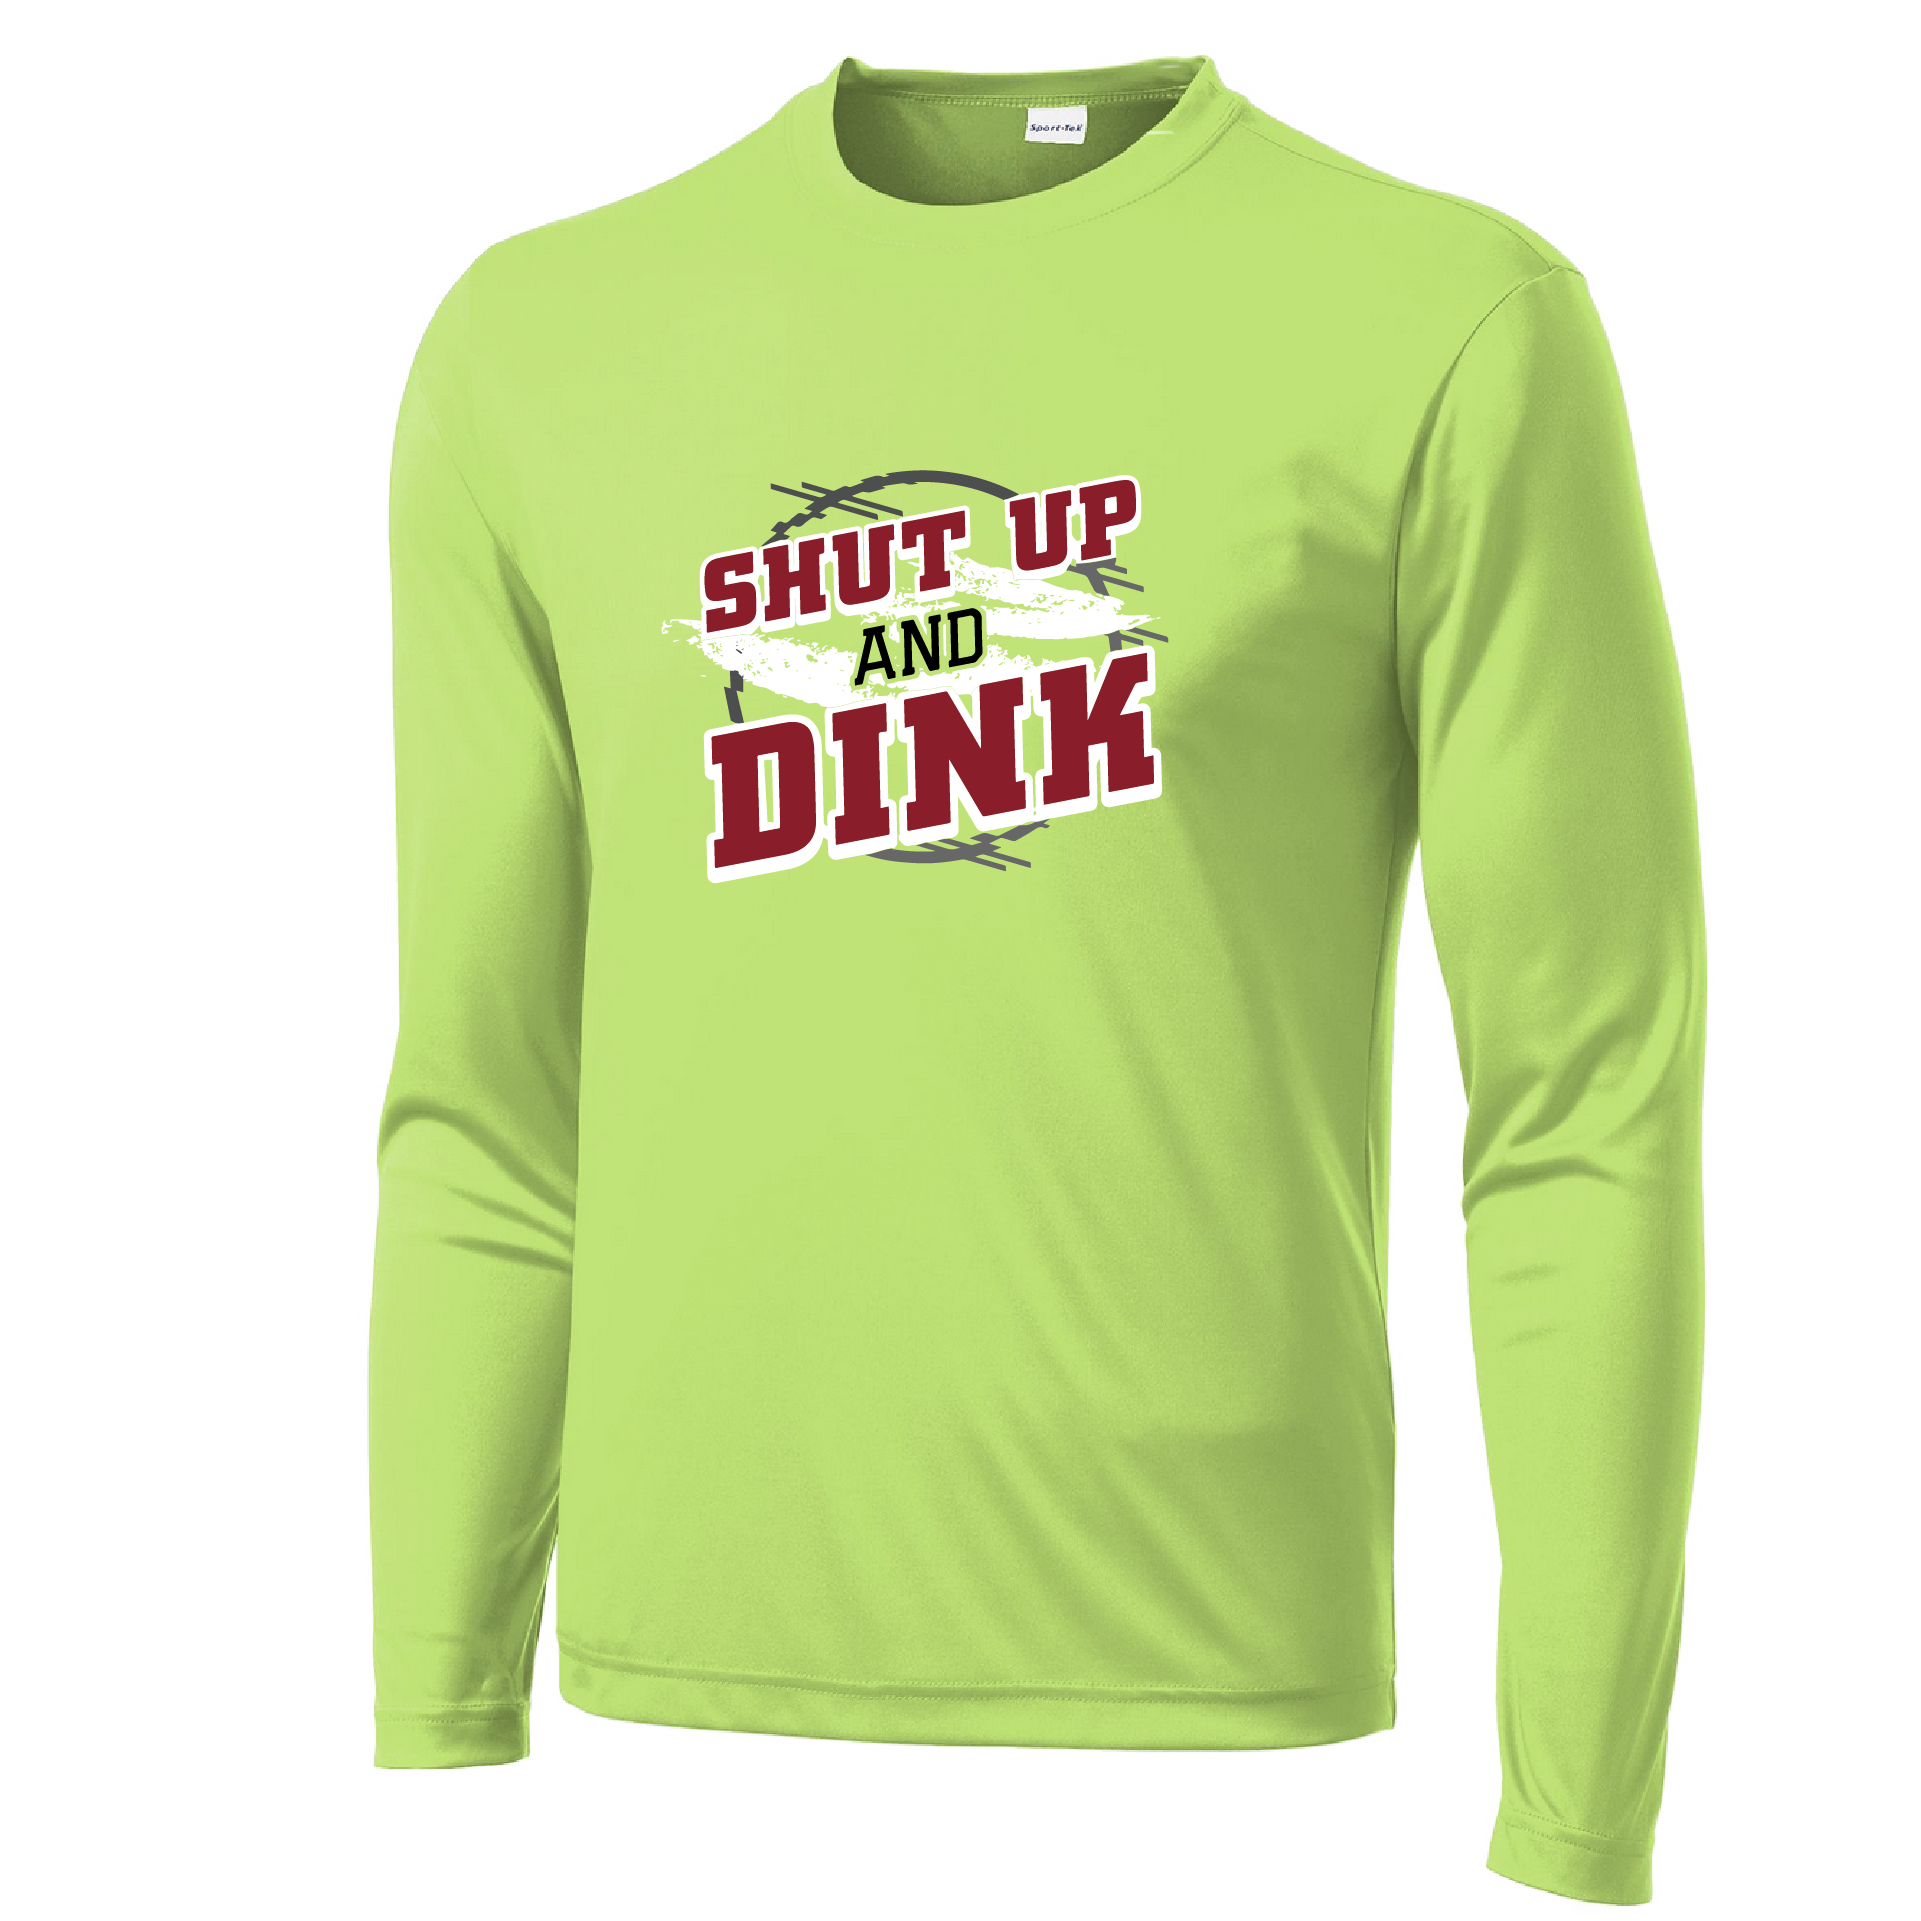 Pickleball Design: Shut up and Dink  Men's Styles: Long-Sleeve  Shirts are lightweight, roomy and highly breathable. These moisture-wicking shirts are designed for athletic performance. They feature PosiCharge technology to lock in color and prevent logos from fading. Removable tag and set-in sleeves for comfort.